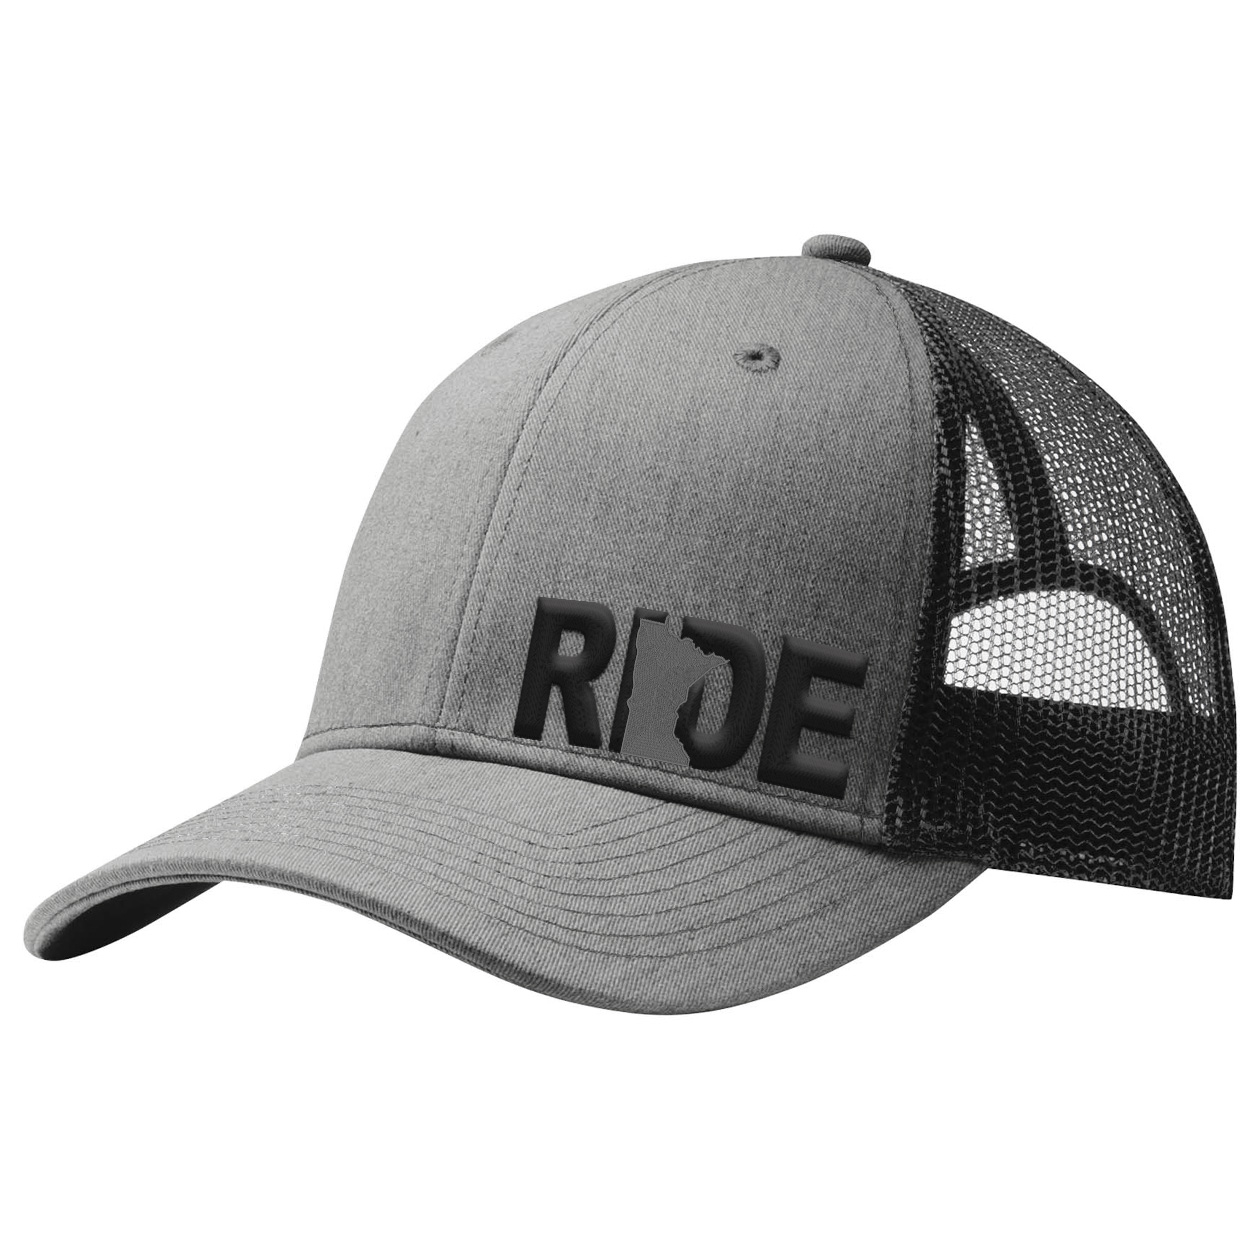 Ride Minnesota Night Out Pro Embroidered Snapback Trucker Hat Heather Gray/Black